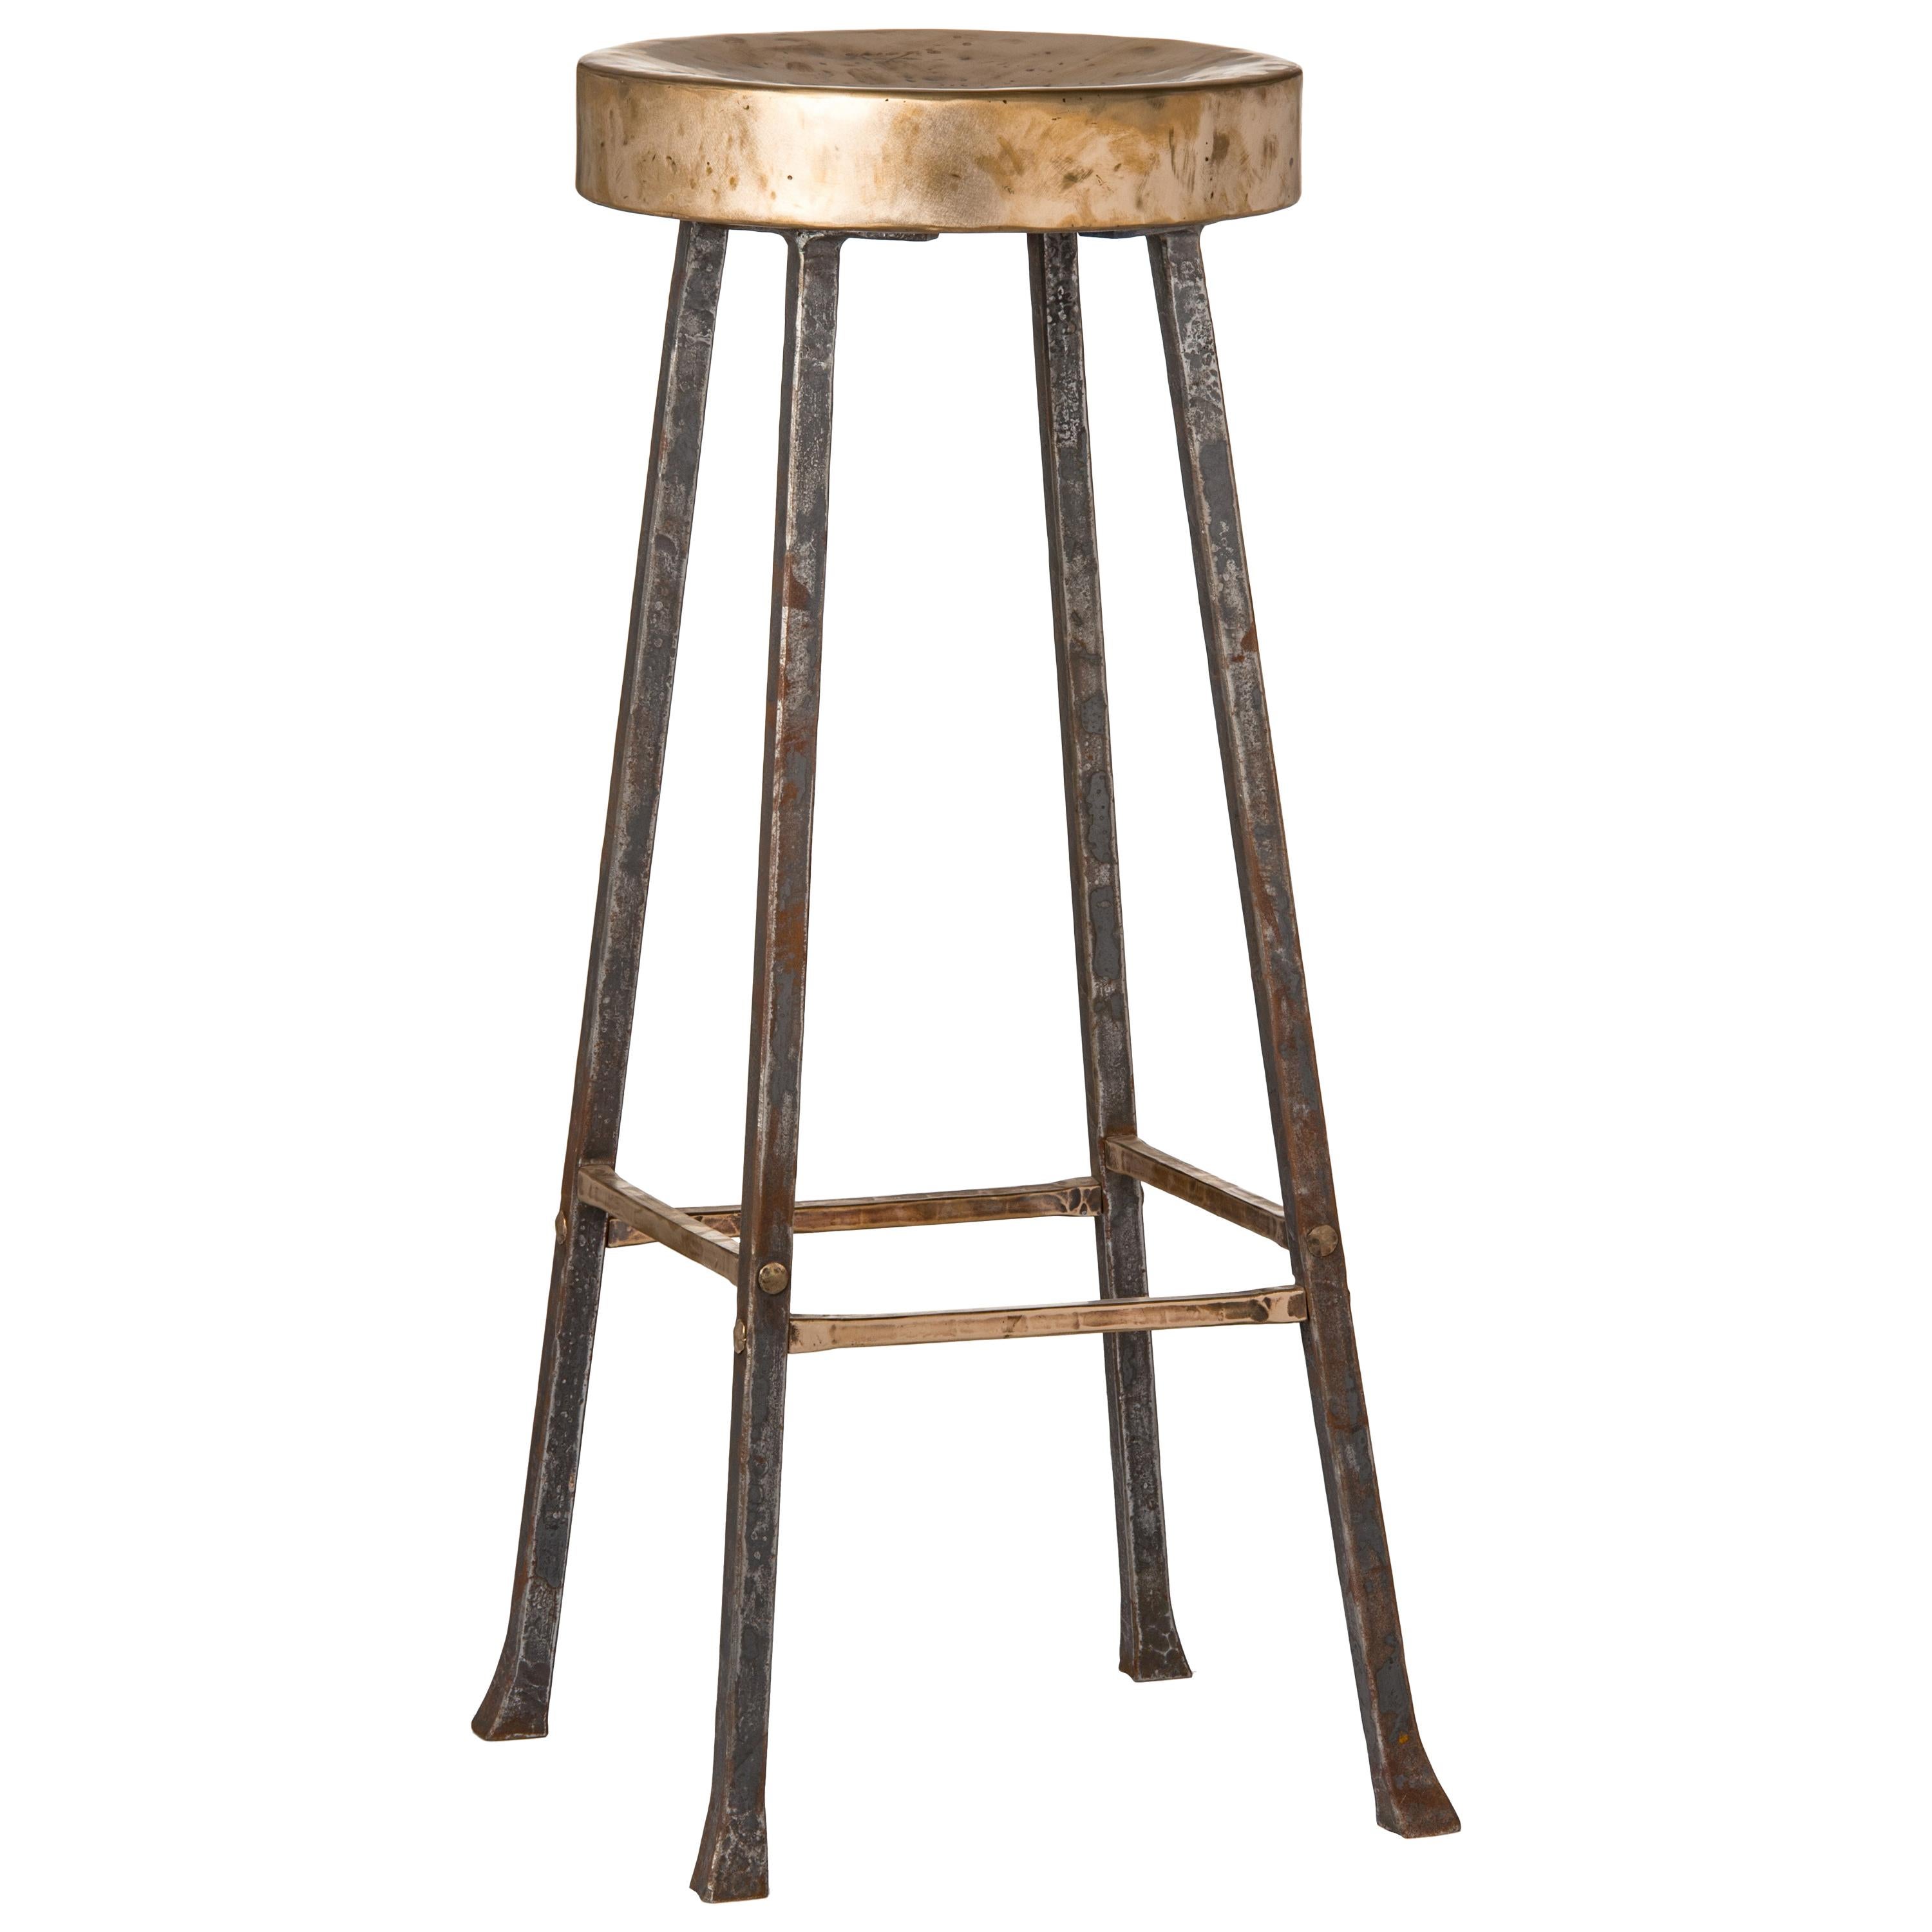 Round Bronze Bar Stool with Forged and Hammered Steel Legs